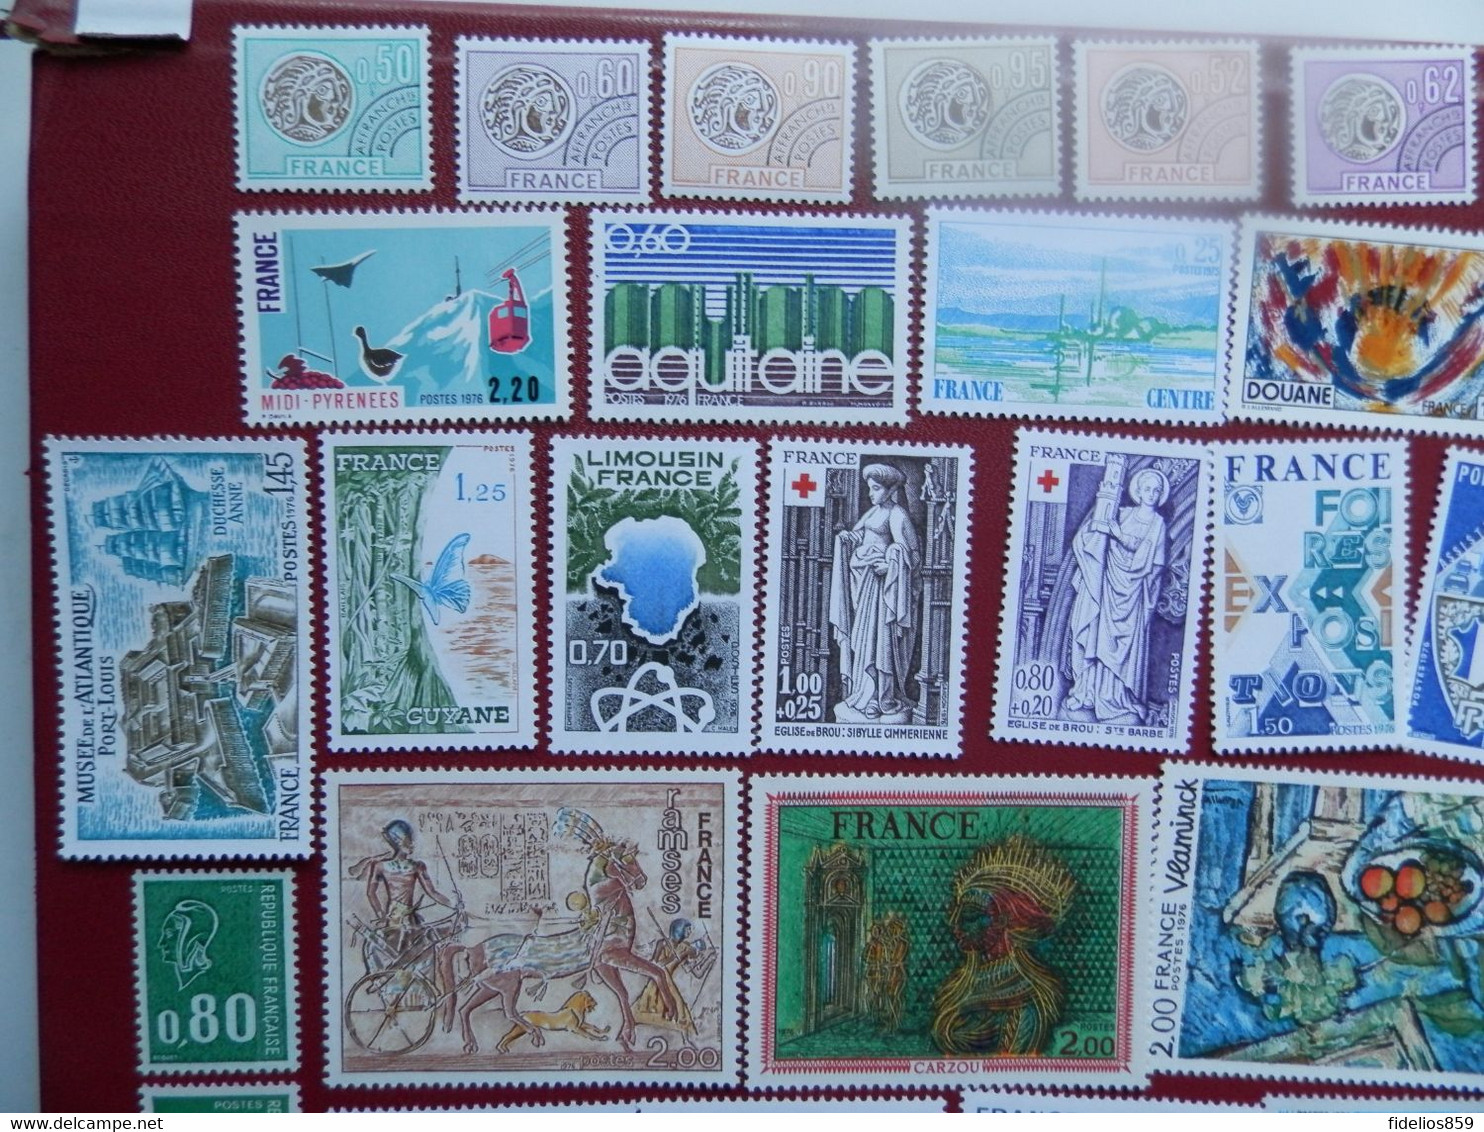 FRANCE ANNEE COMPLETE 1976 SOIT 61 TIMBRES NEUFS SANS CHARNIERE NI TRACE LUXE - 1970-1979